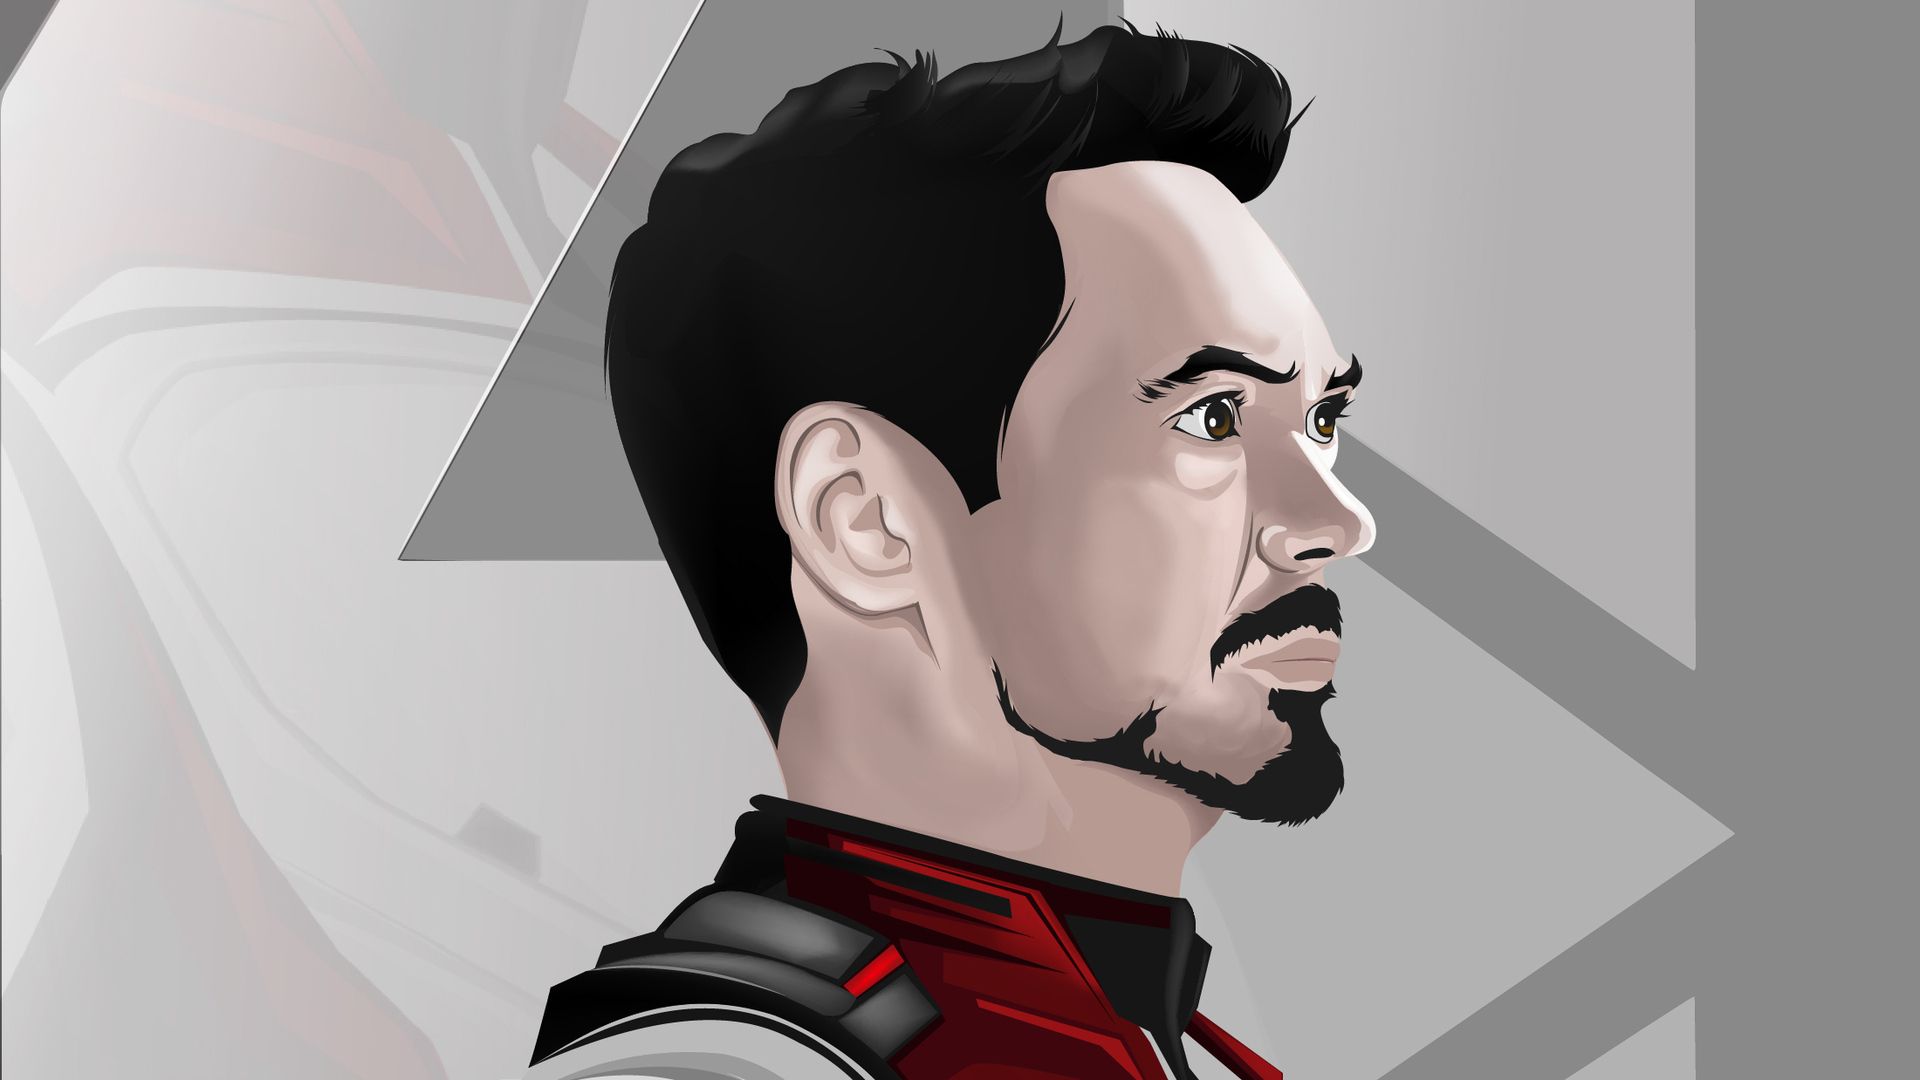 Aavengers Endgame Tony Stark Laptop Full HD 1080P HD 4k Wallpaper, Image, Background, Photo and Picture